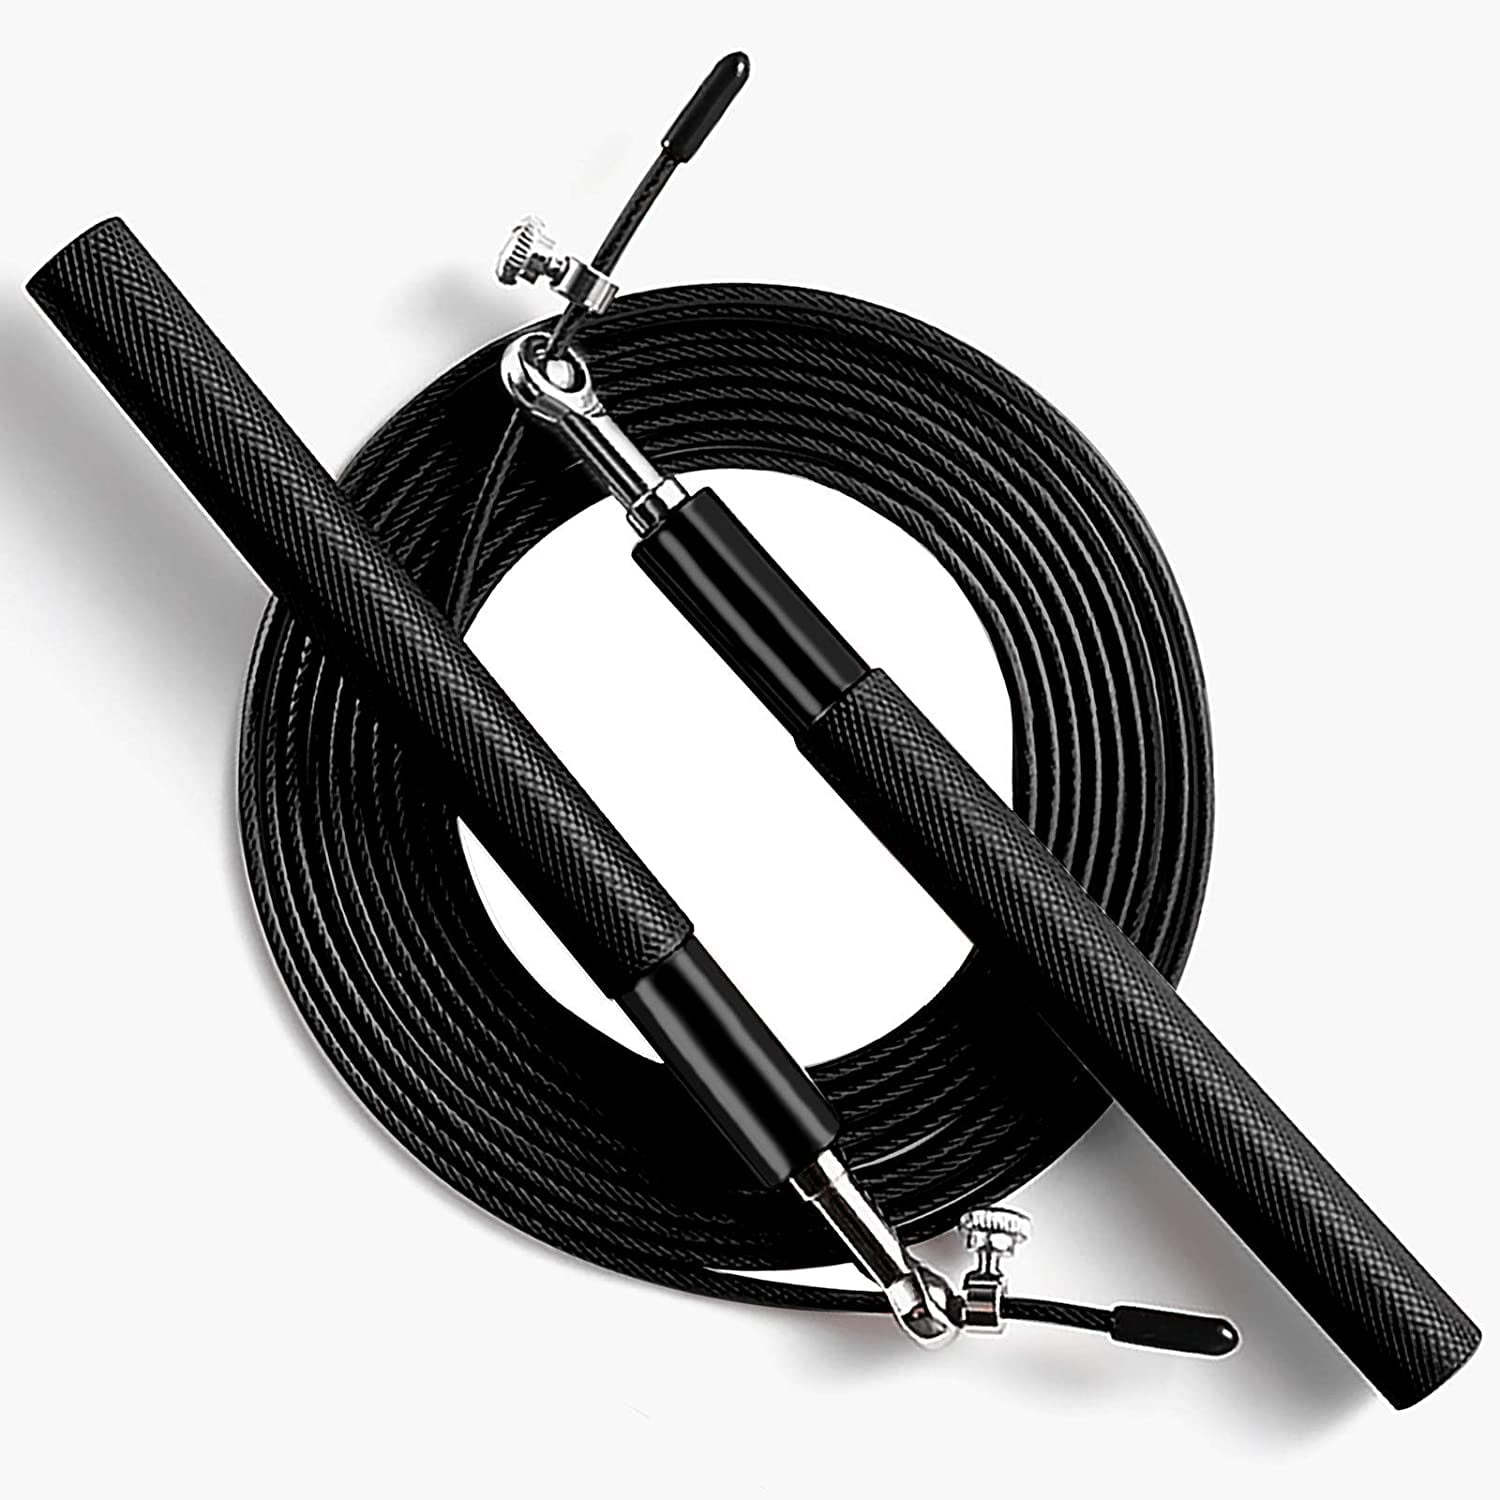 Black Adjustable to All Height Endurance Workout for Boxing Martial Arts or Just Staying Fit 360° Swivel Ball Bearing PHAT™ Jump Rope & Skipping Rope 